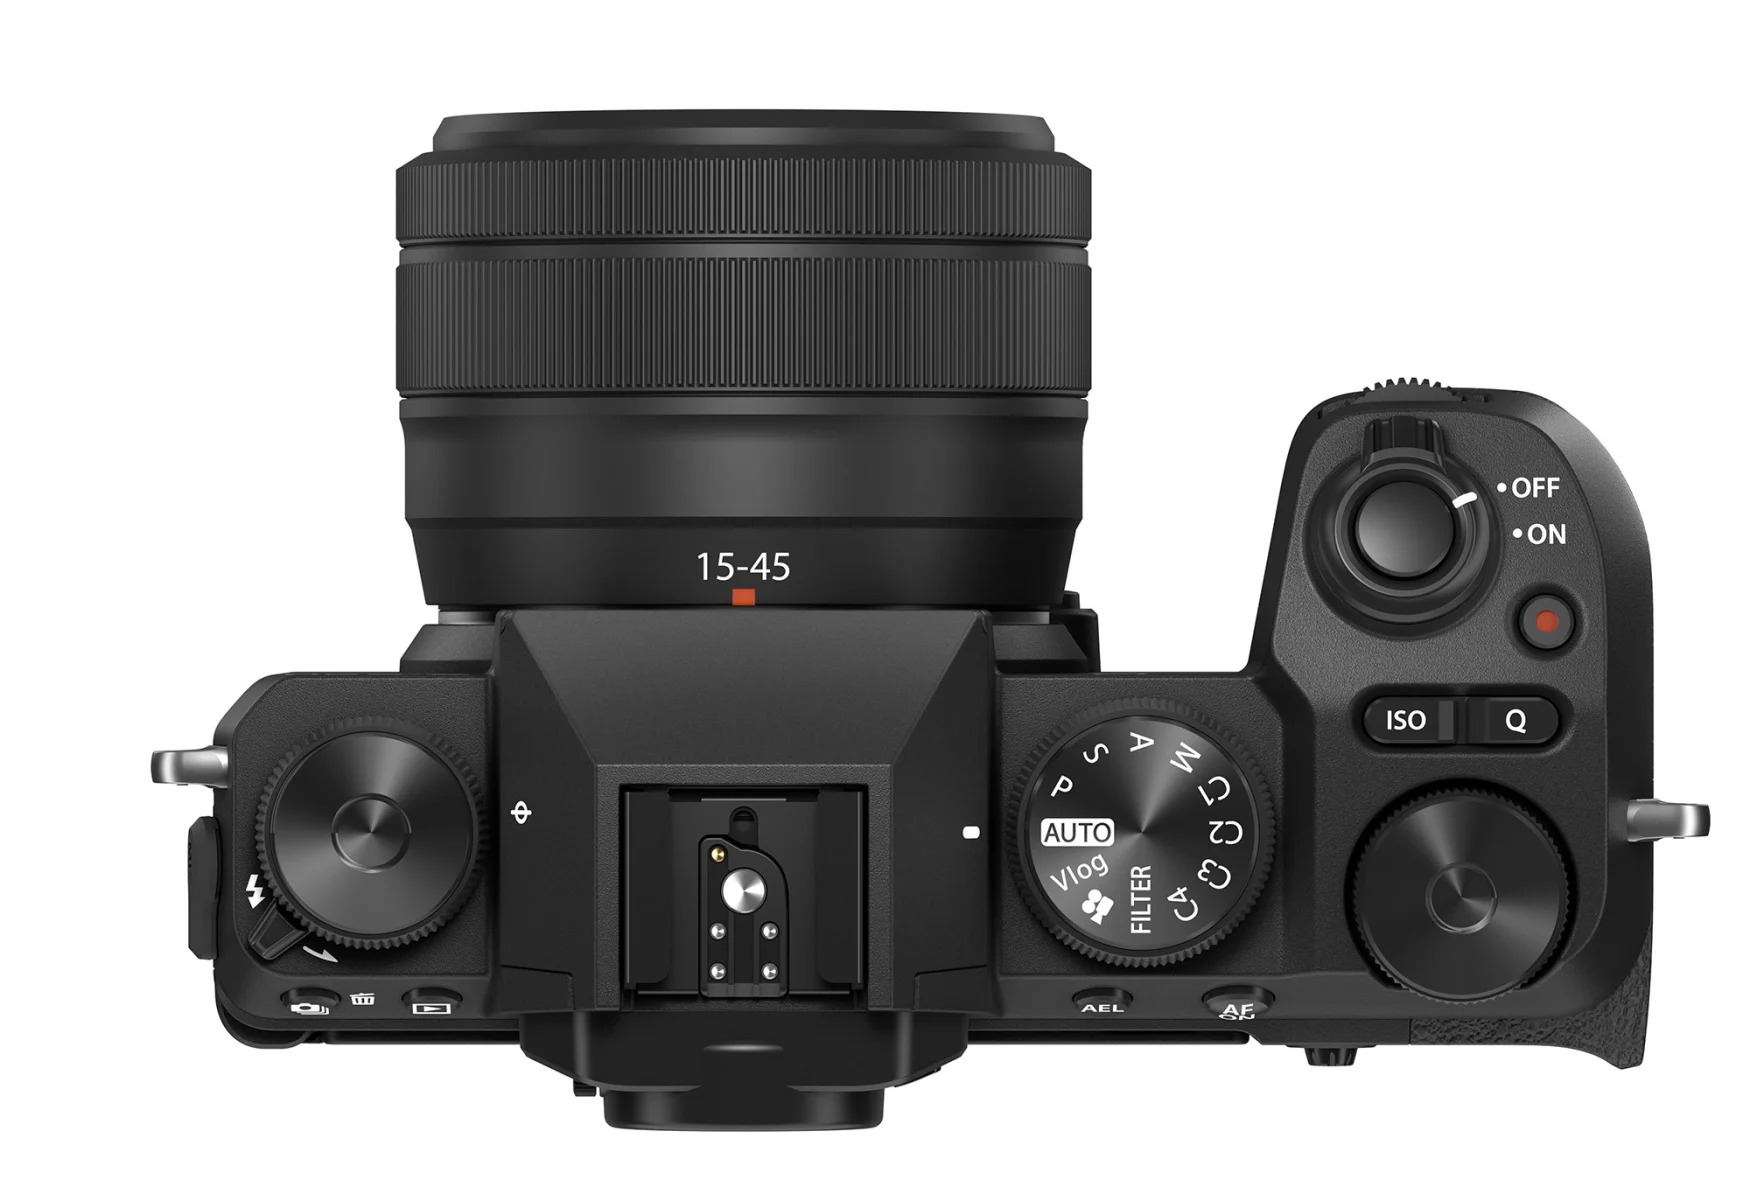 Fujifilm's X-S20 goes hard on content creation with 6.2K video and a vlog-specific dial